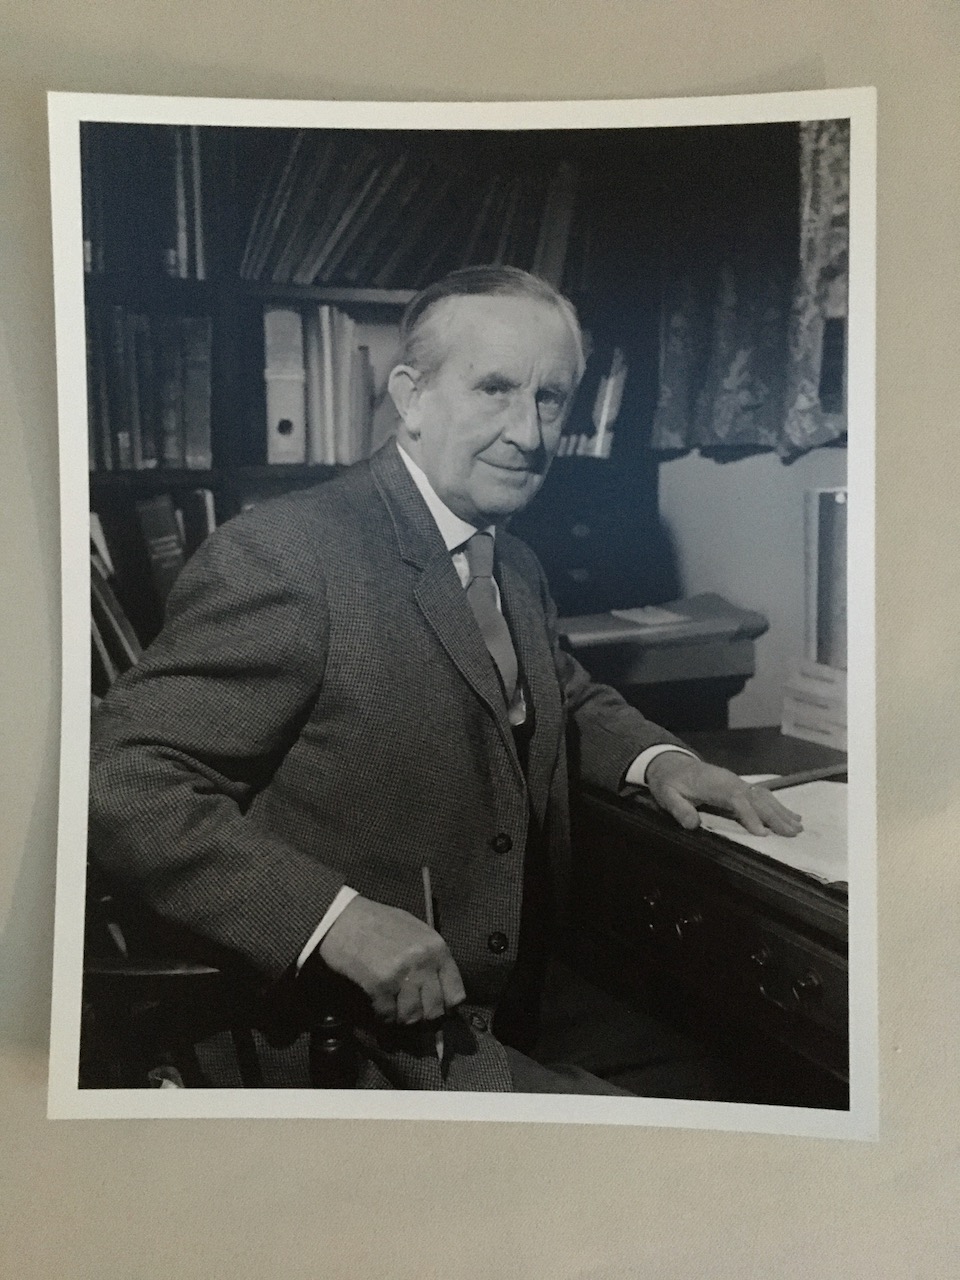 Exclusive Photographic Print: J.R.R. Tolkien sits at his writing desk, clutching a pen